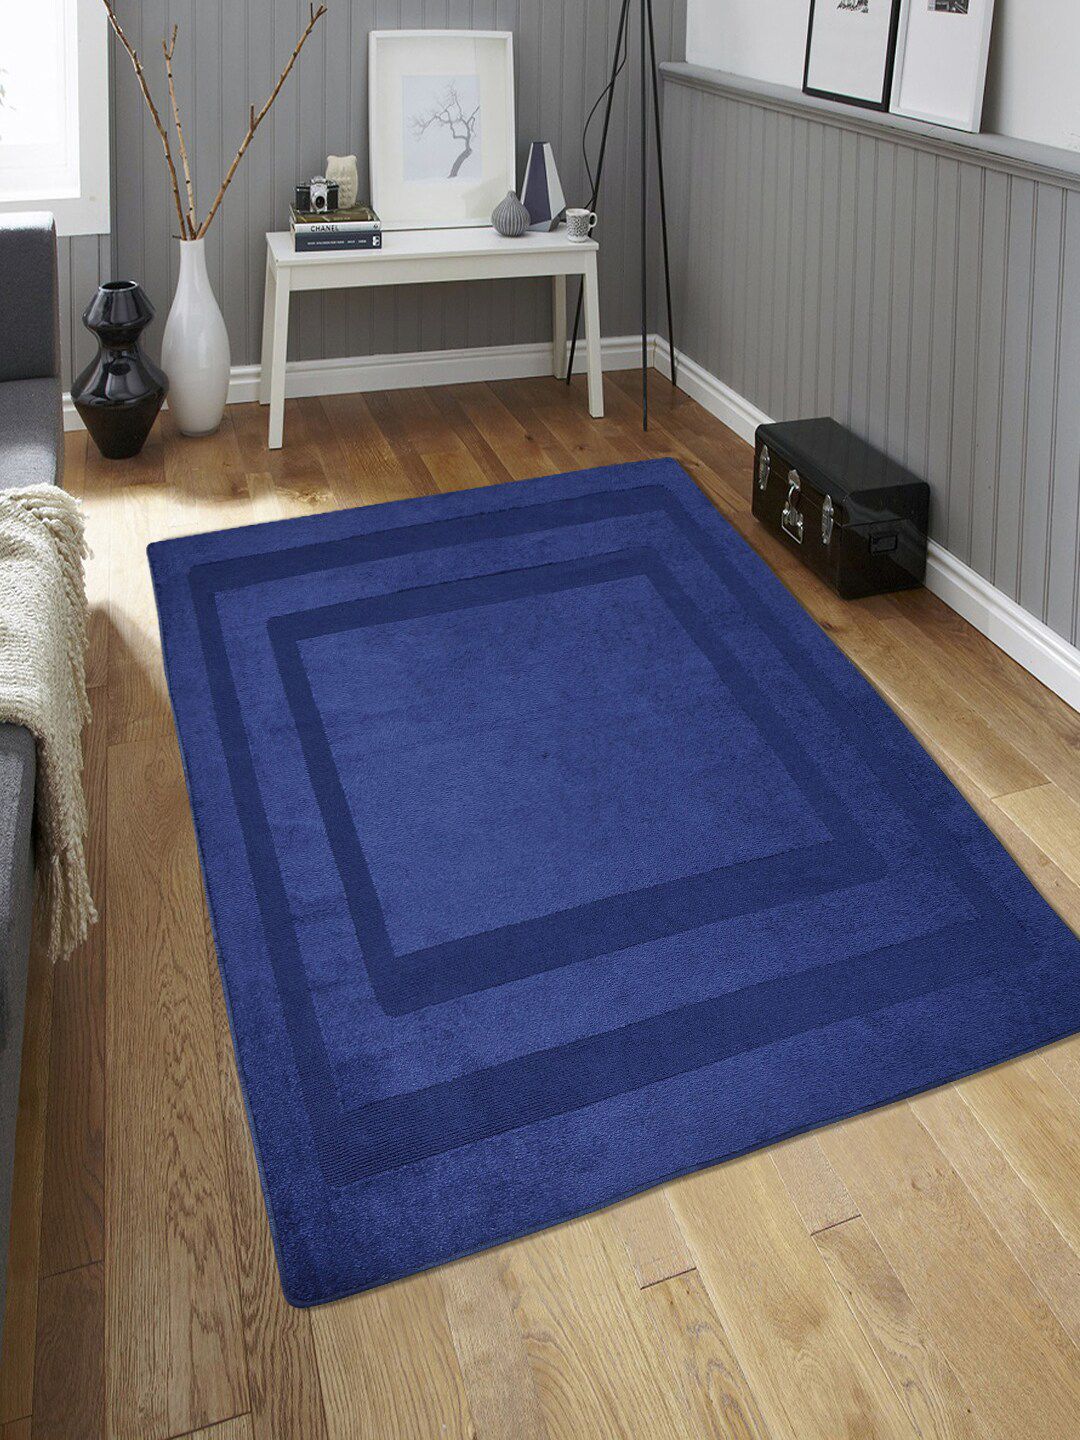 Saral Home Blue Solid Anti-Skid Carpet Price in India